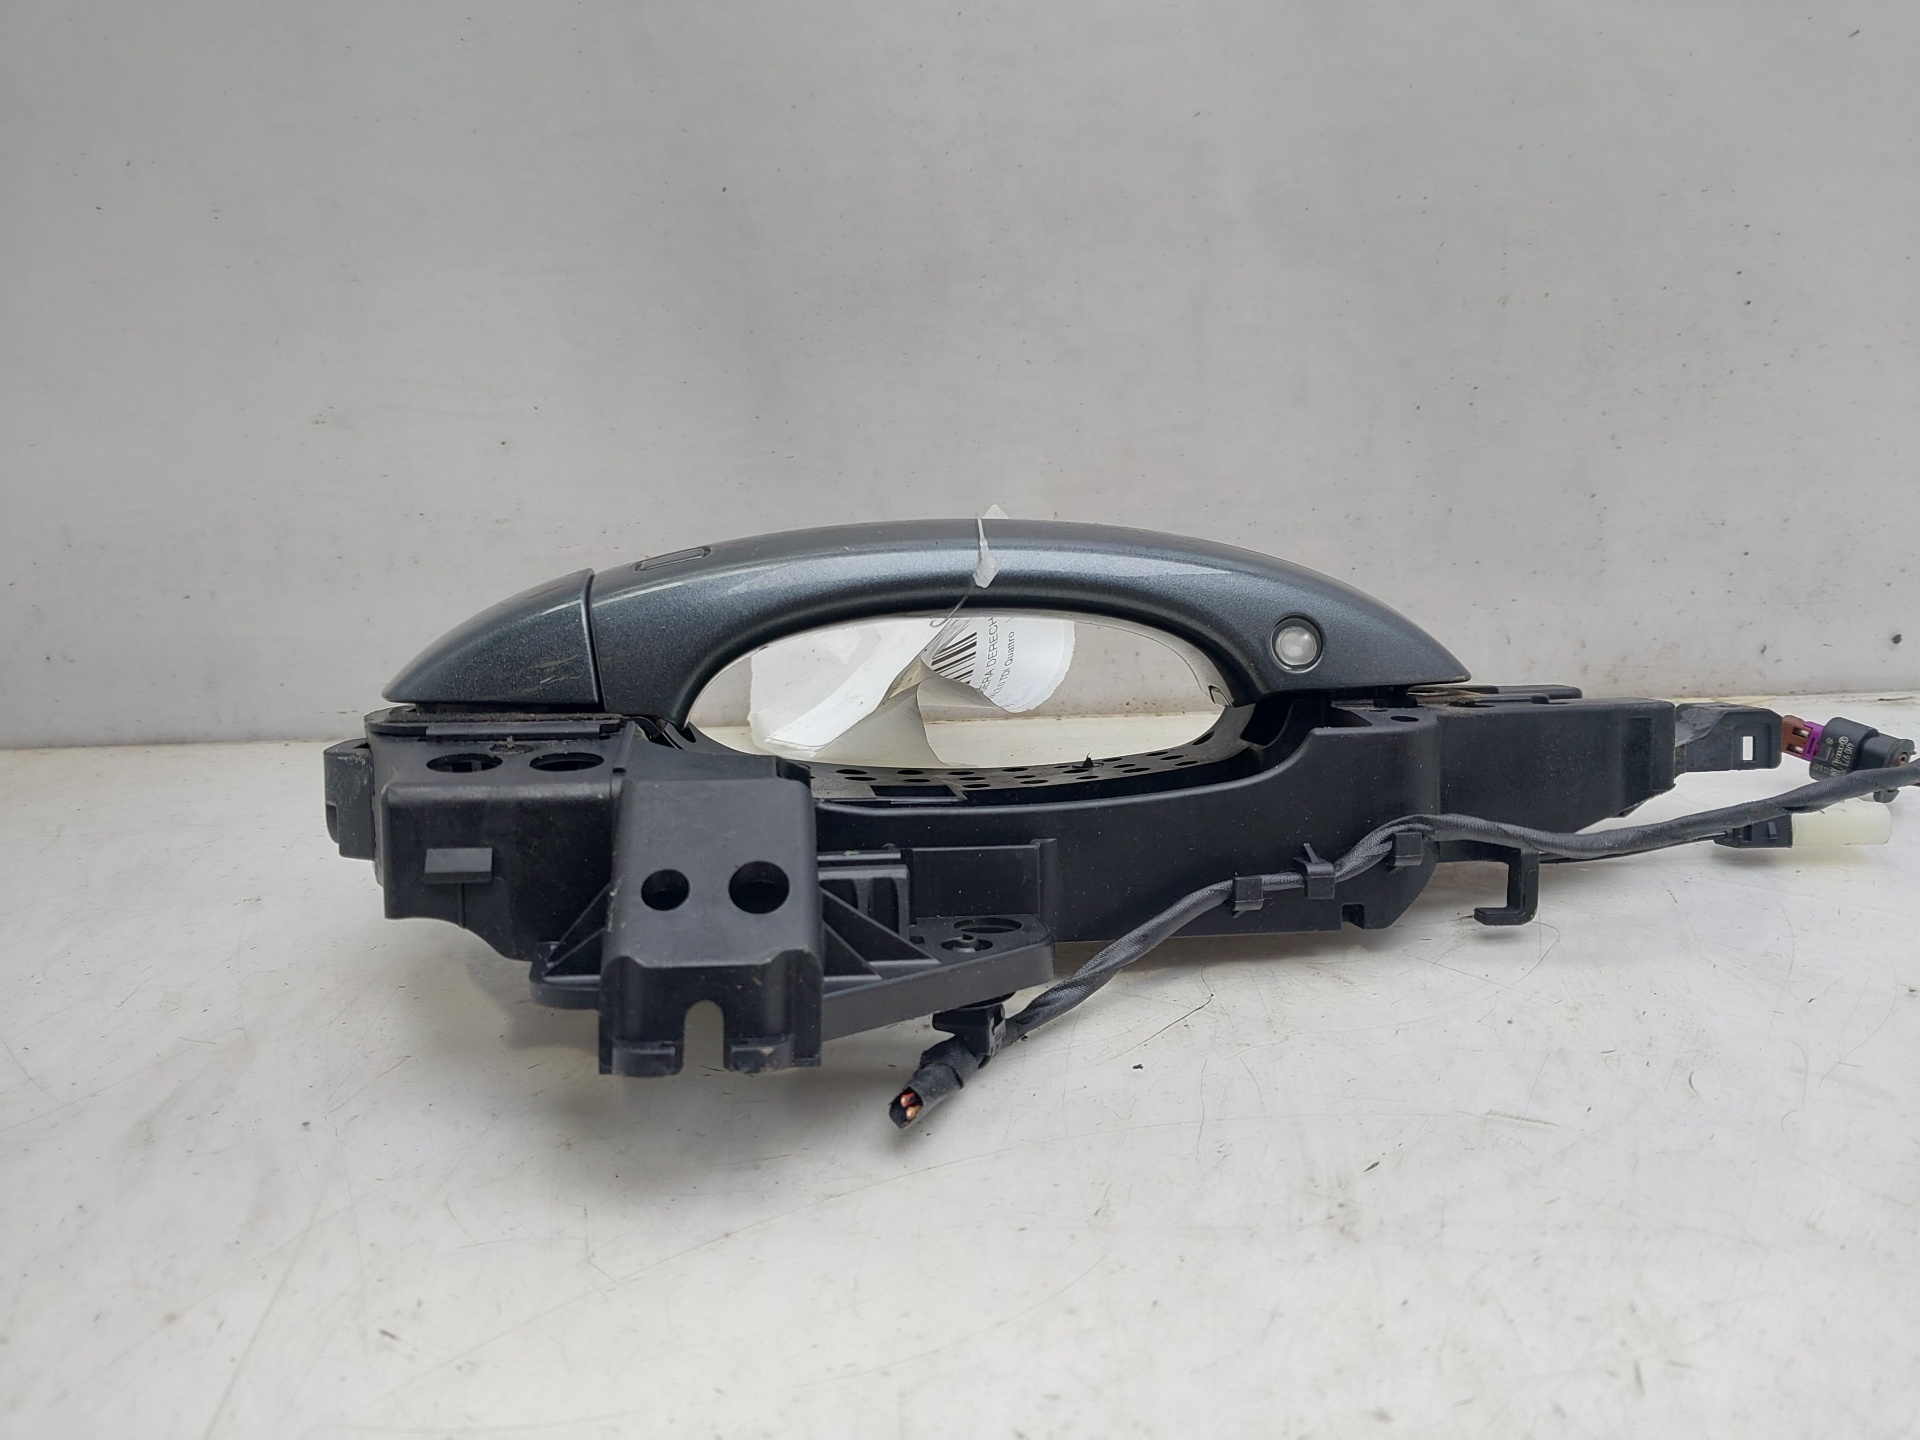 AUDI A7 C7/4G (2010-2020) Rear right door outer handle 4H0837886, 135.677KMS, 5PUERTAS 23070783